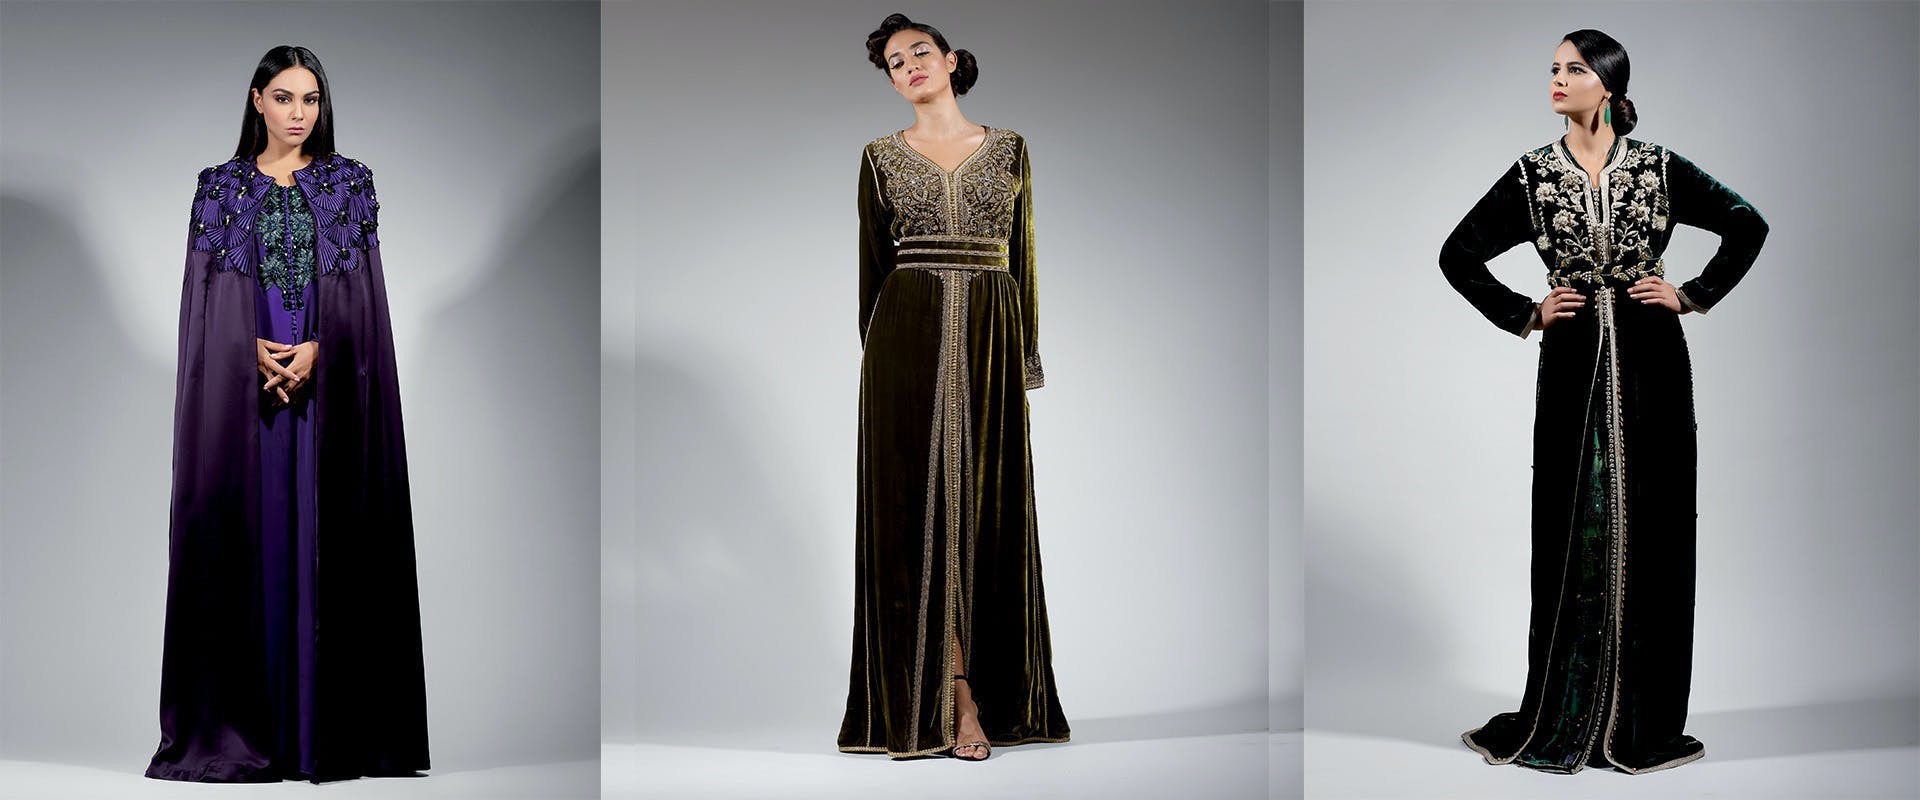 dress clothing sleeve female person long sleeve woman evening dress gown fashion